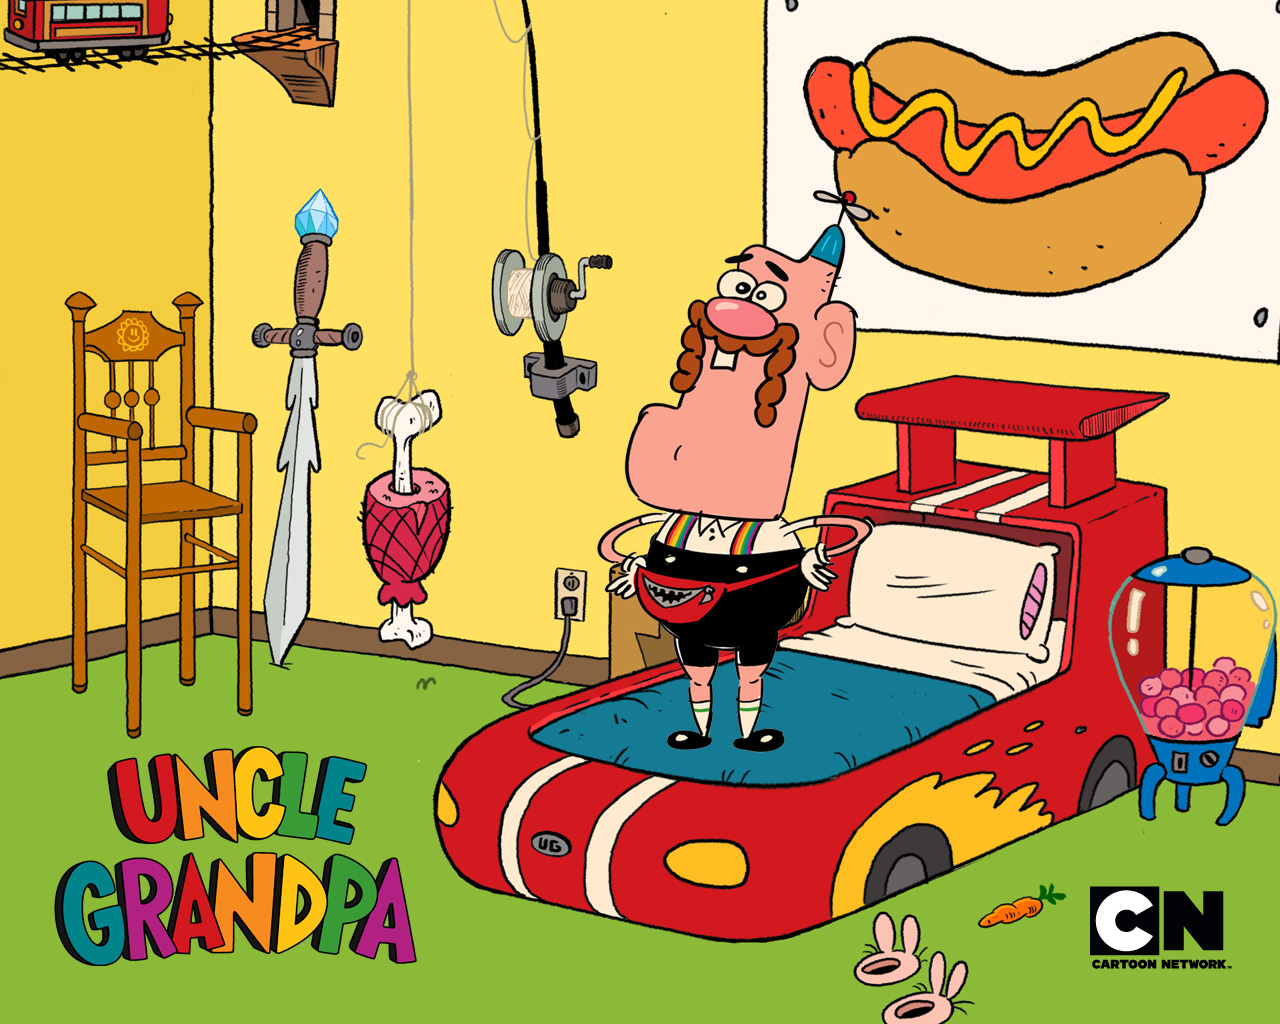 Clip Arts Related To : uncle grandpa bad morning. 